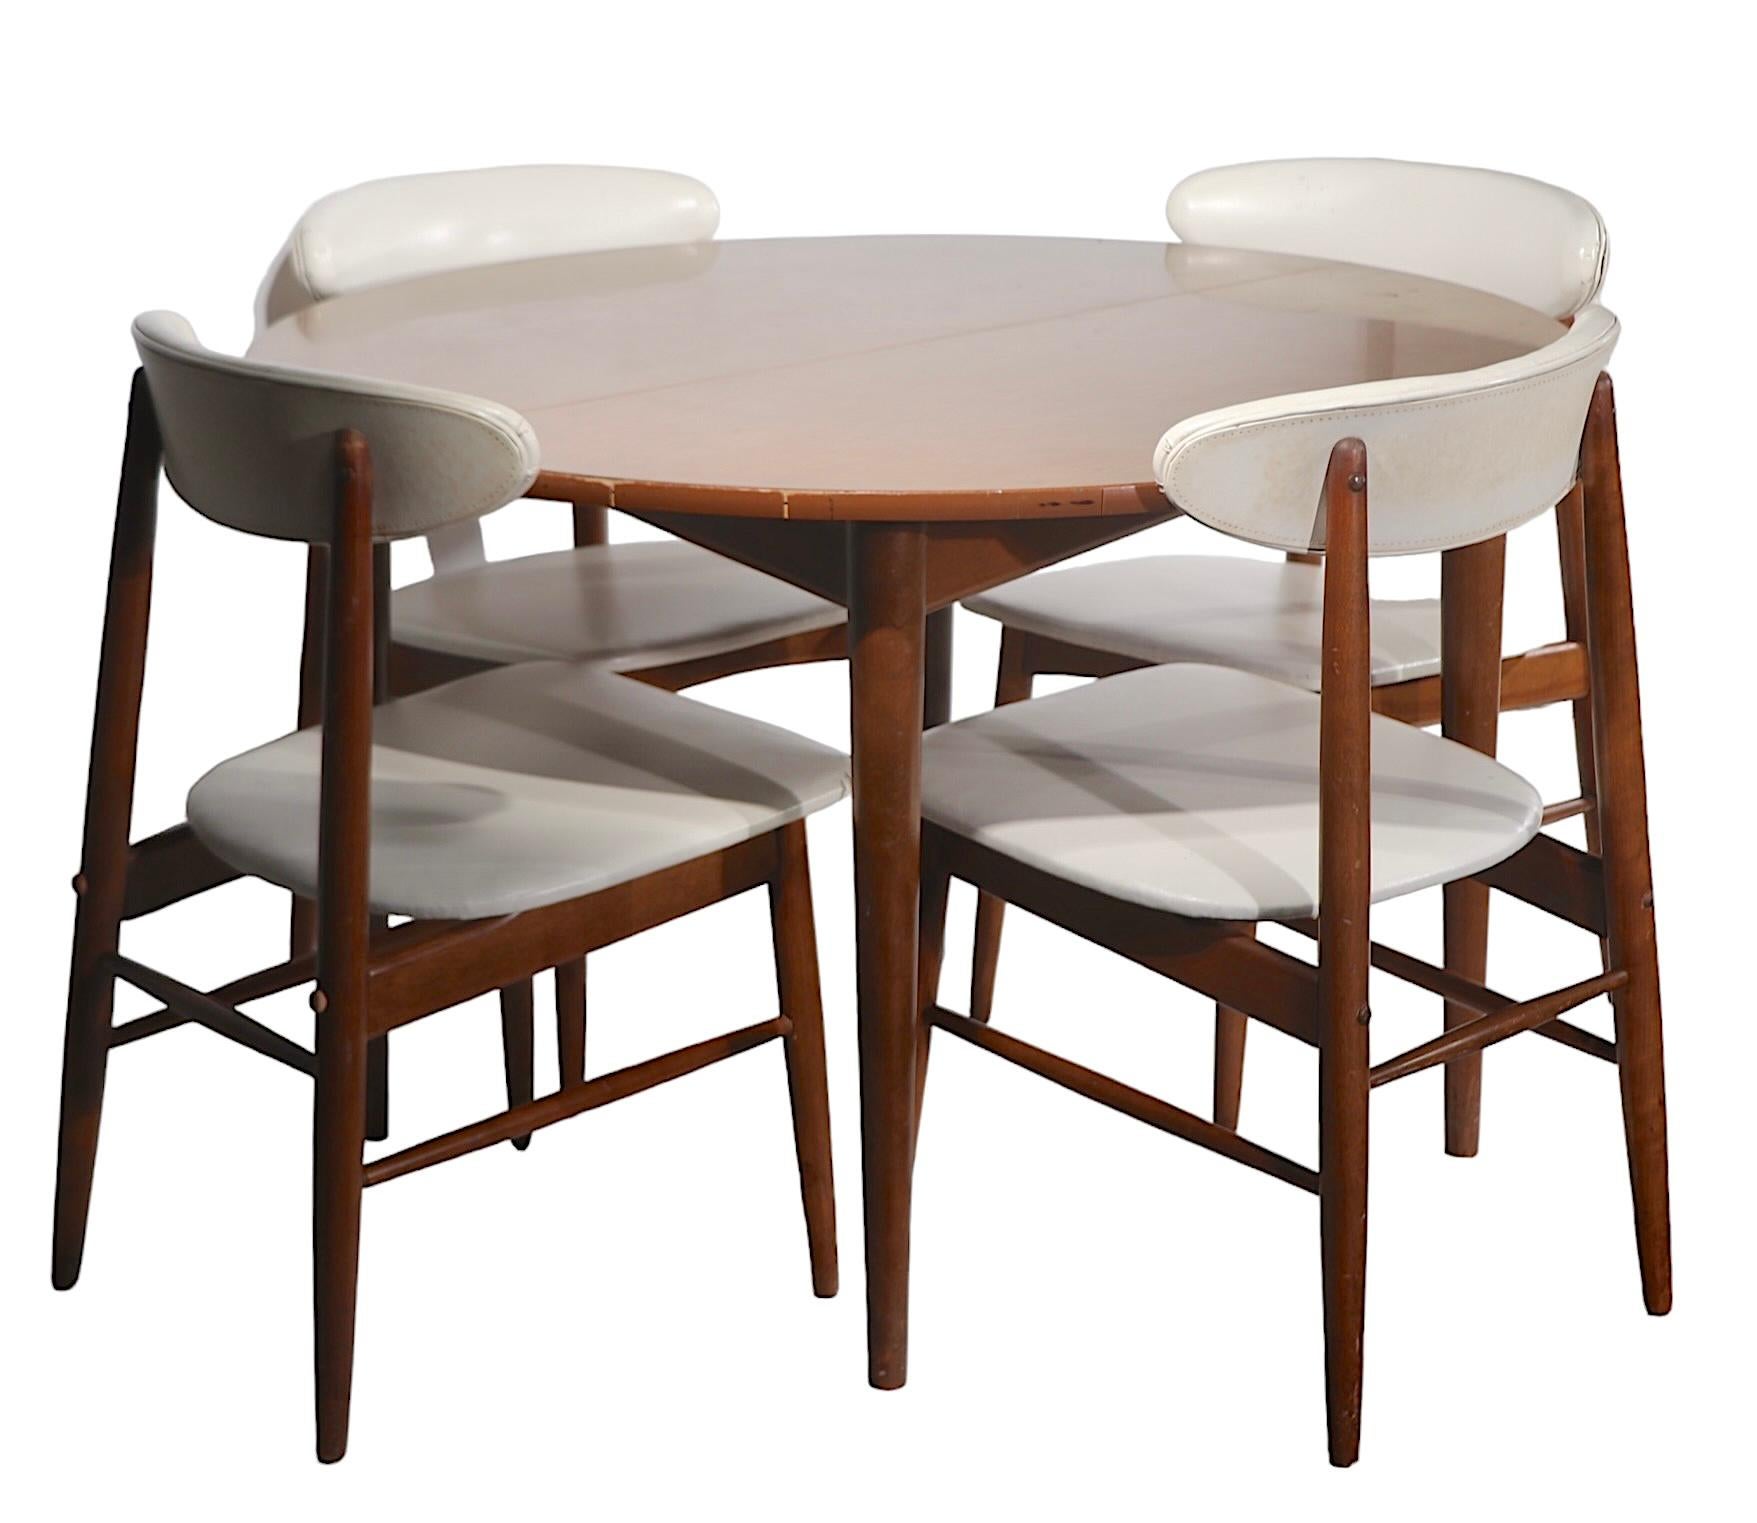 5 pc Mid Century Dinette Set by Viko Baumritter c 1950’s In Good Condition For Sale In New York, NY